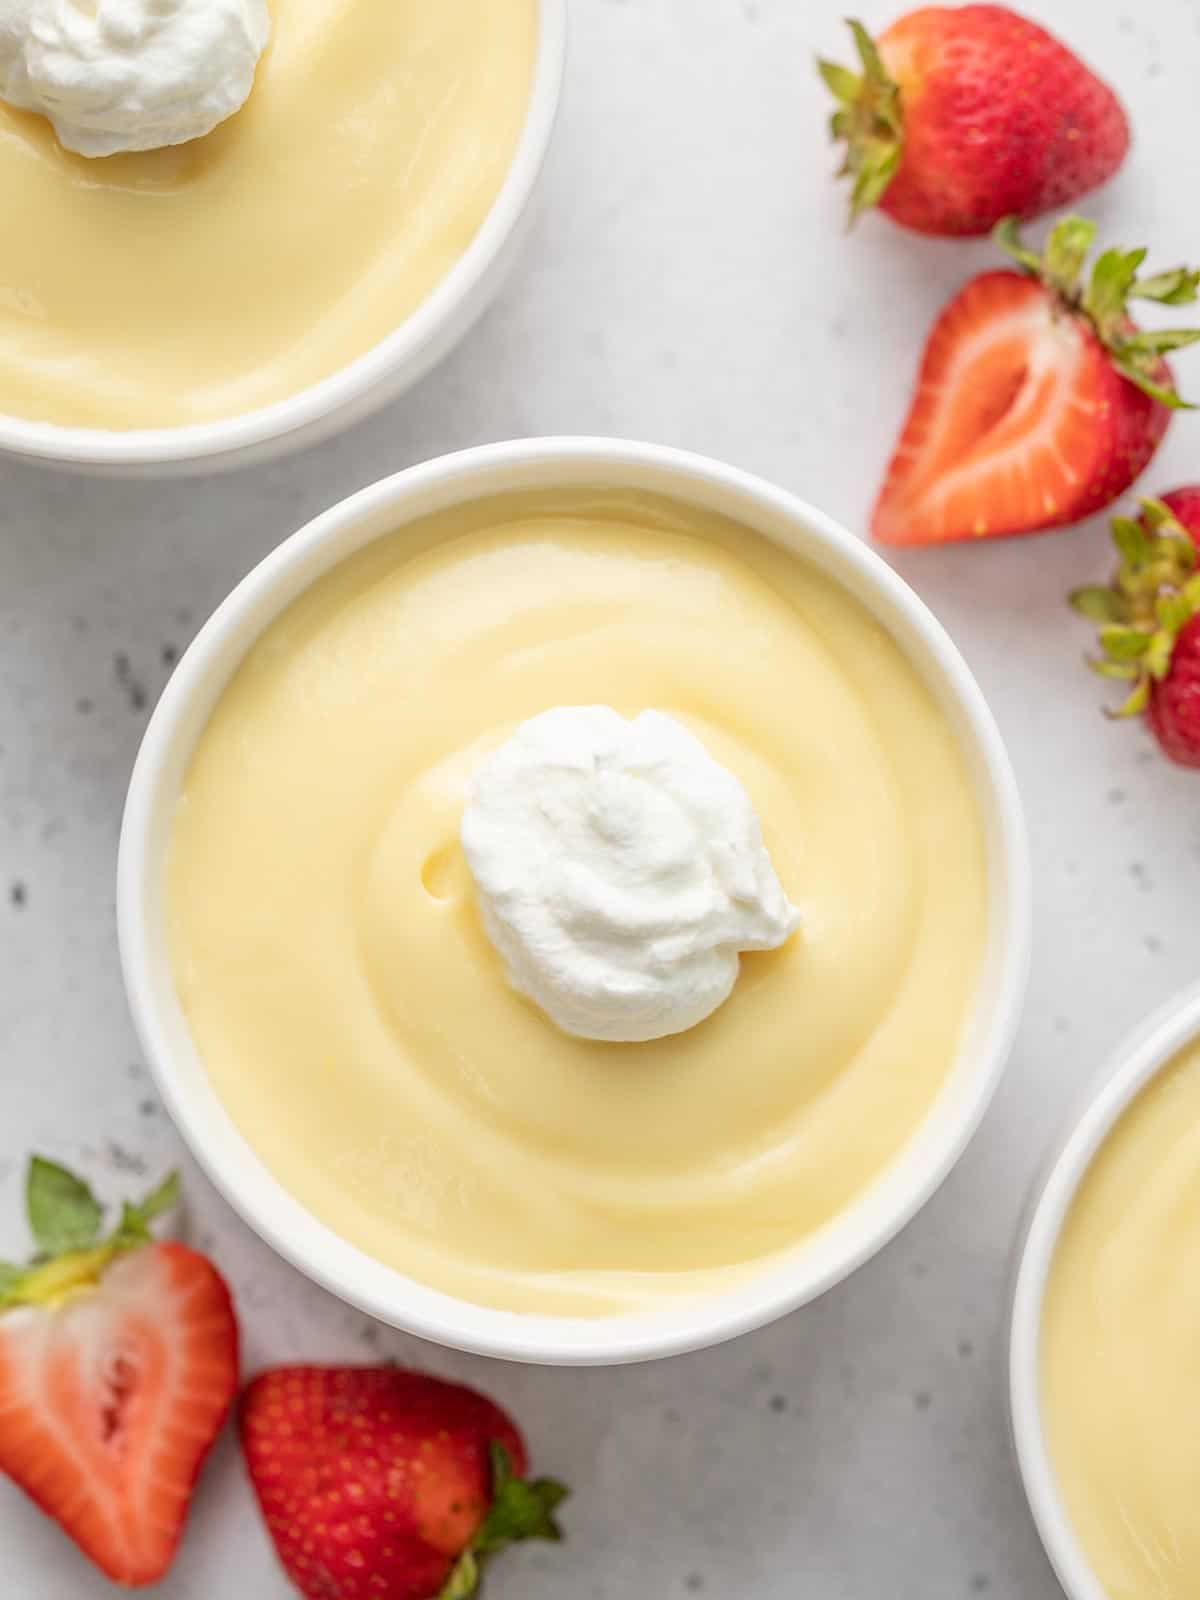 Overhead shot of vanilla pudding in a white bowl with whipped cream on top and cut strawberries on the counter.